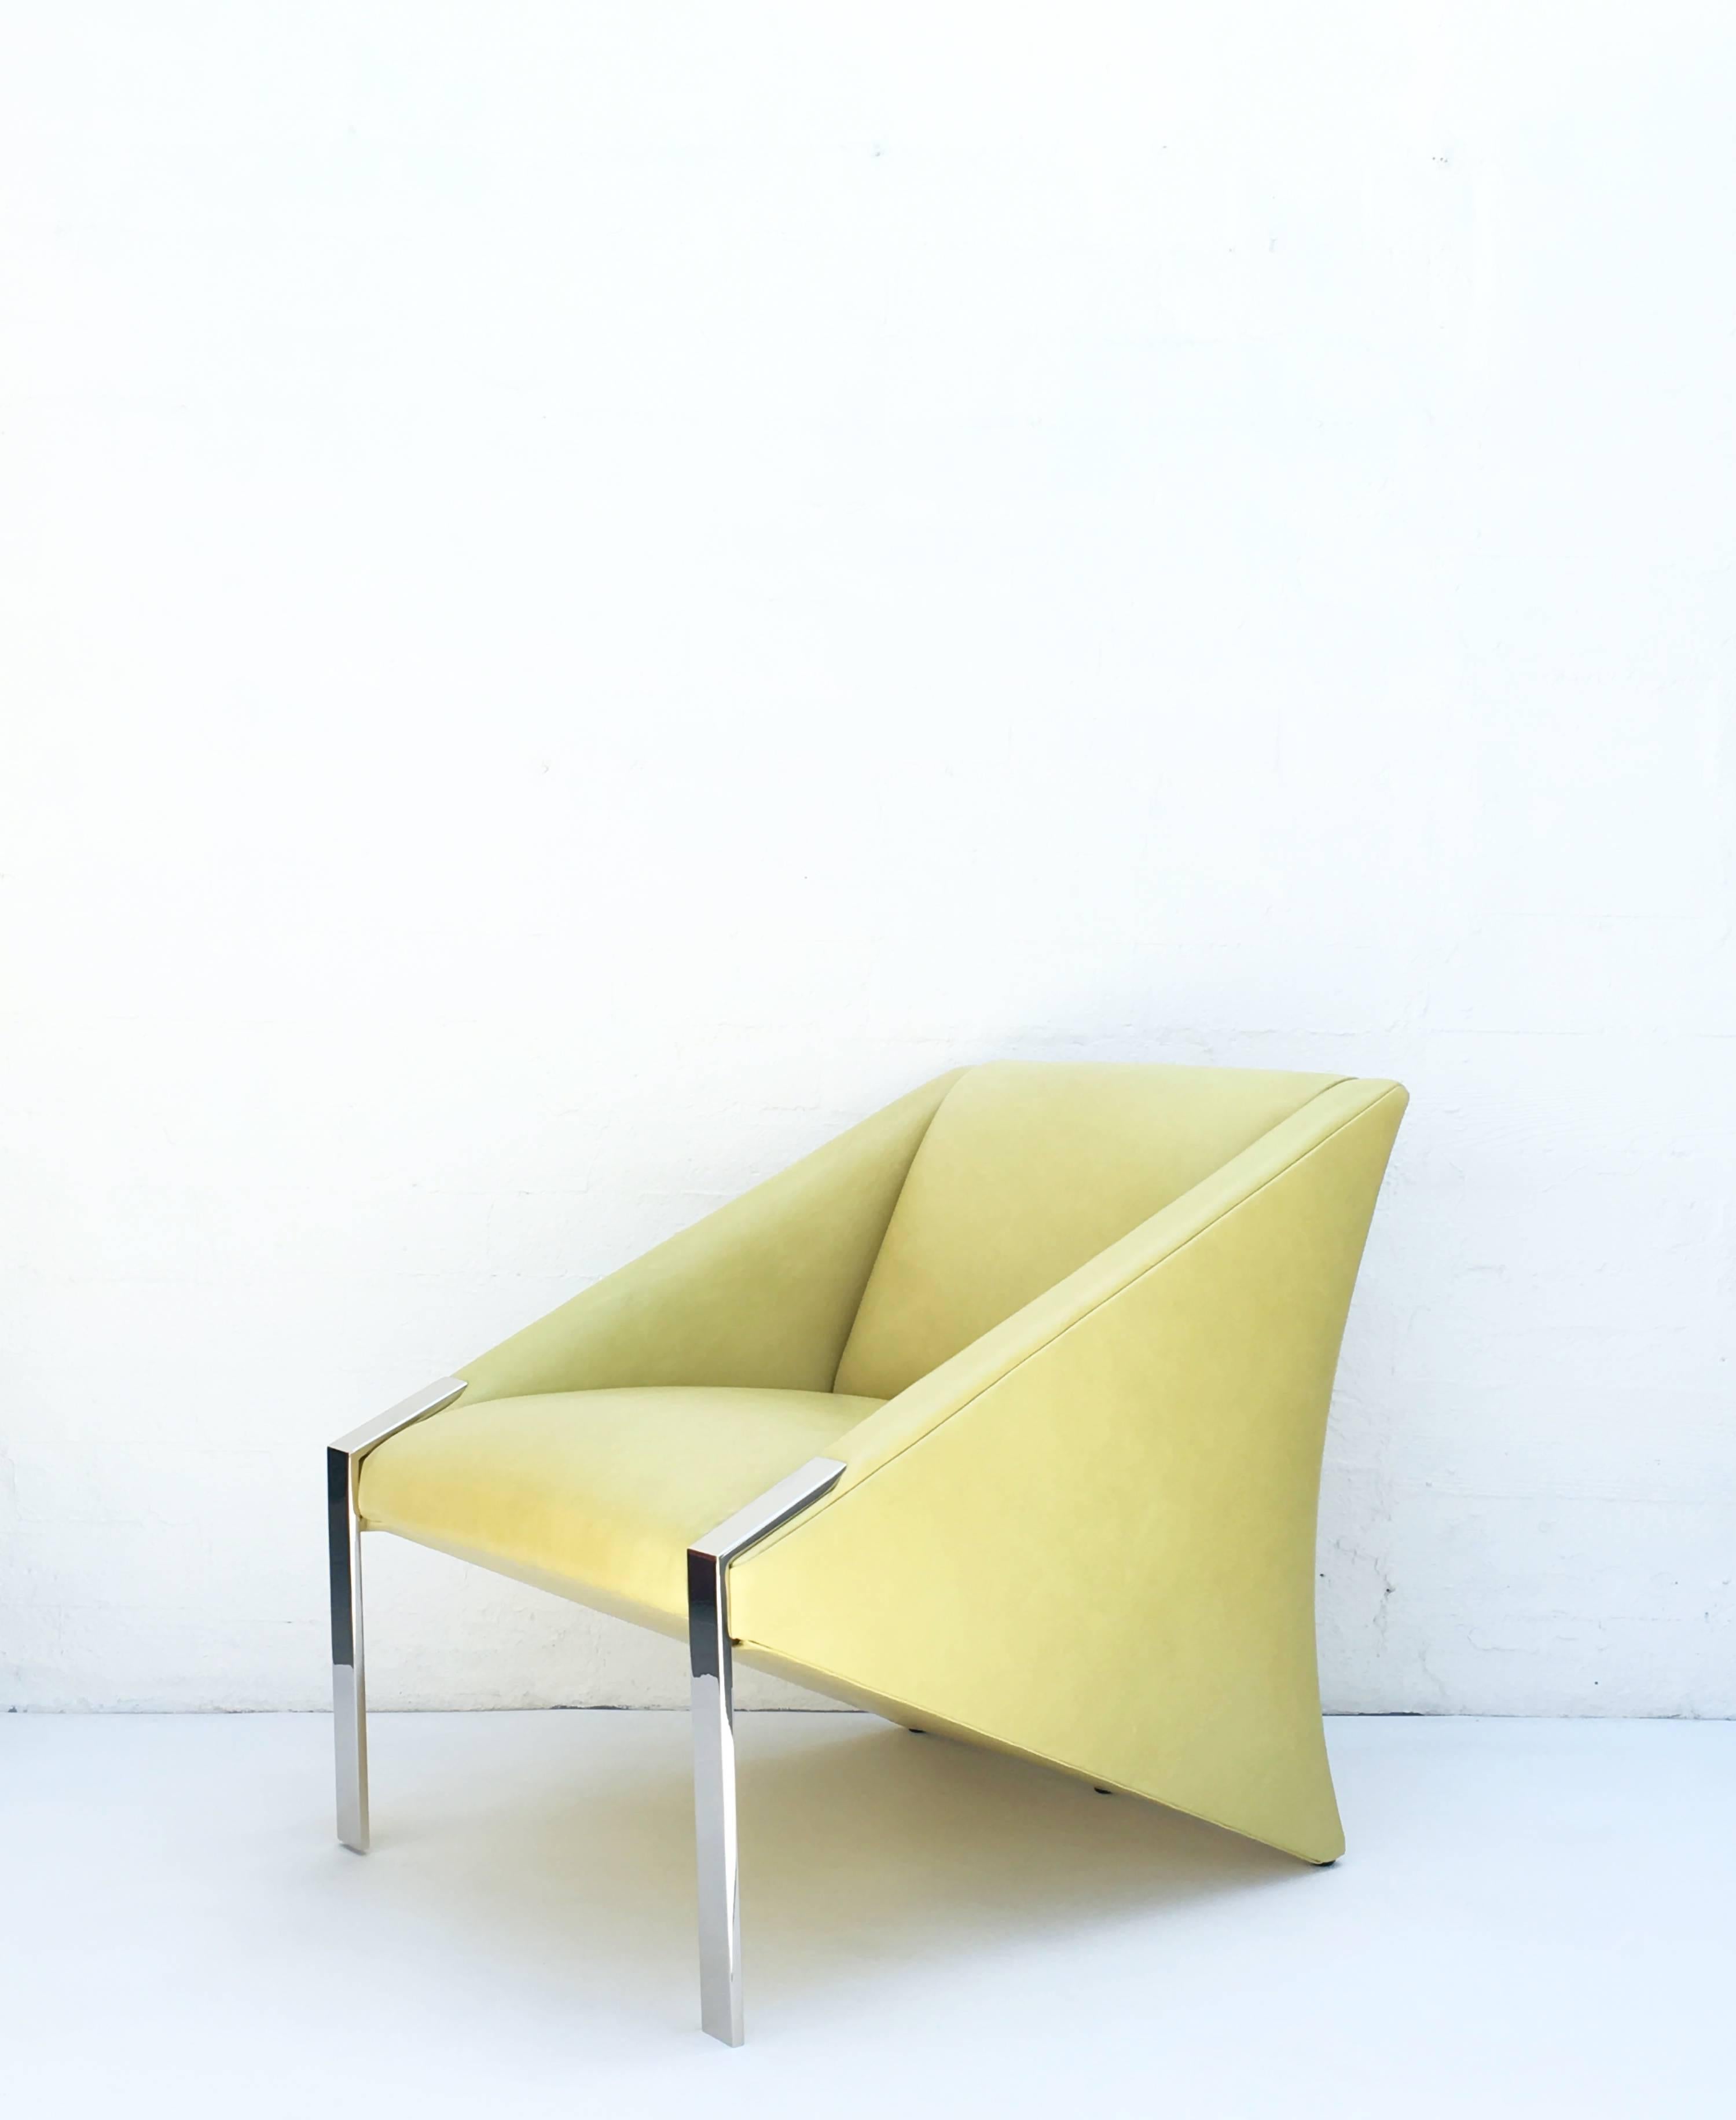 This rare sleek modern lounge chairs in the style of Milo Baughman 

Newly nickel-plated and reupholstered in a pale lime green leather.